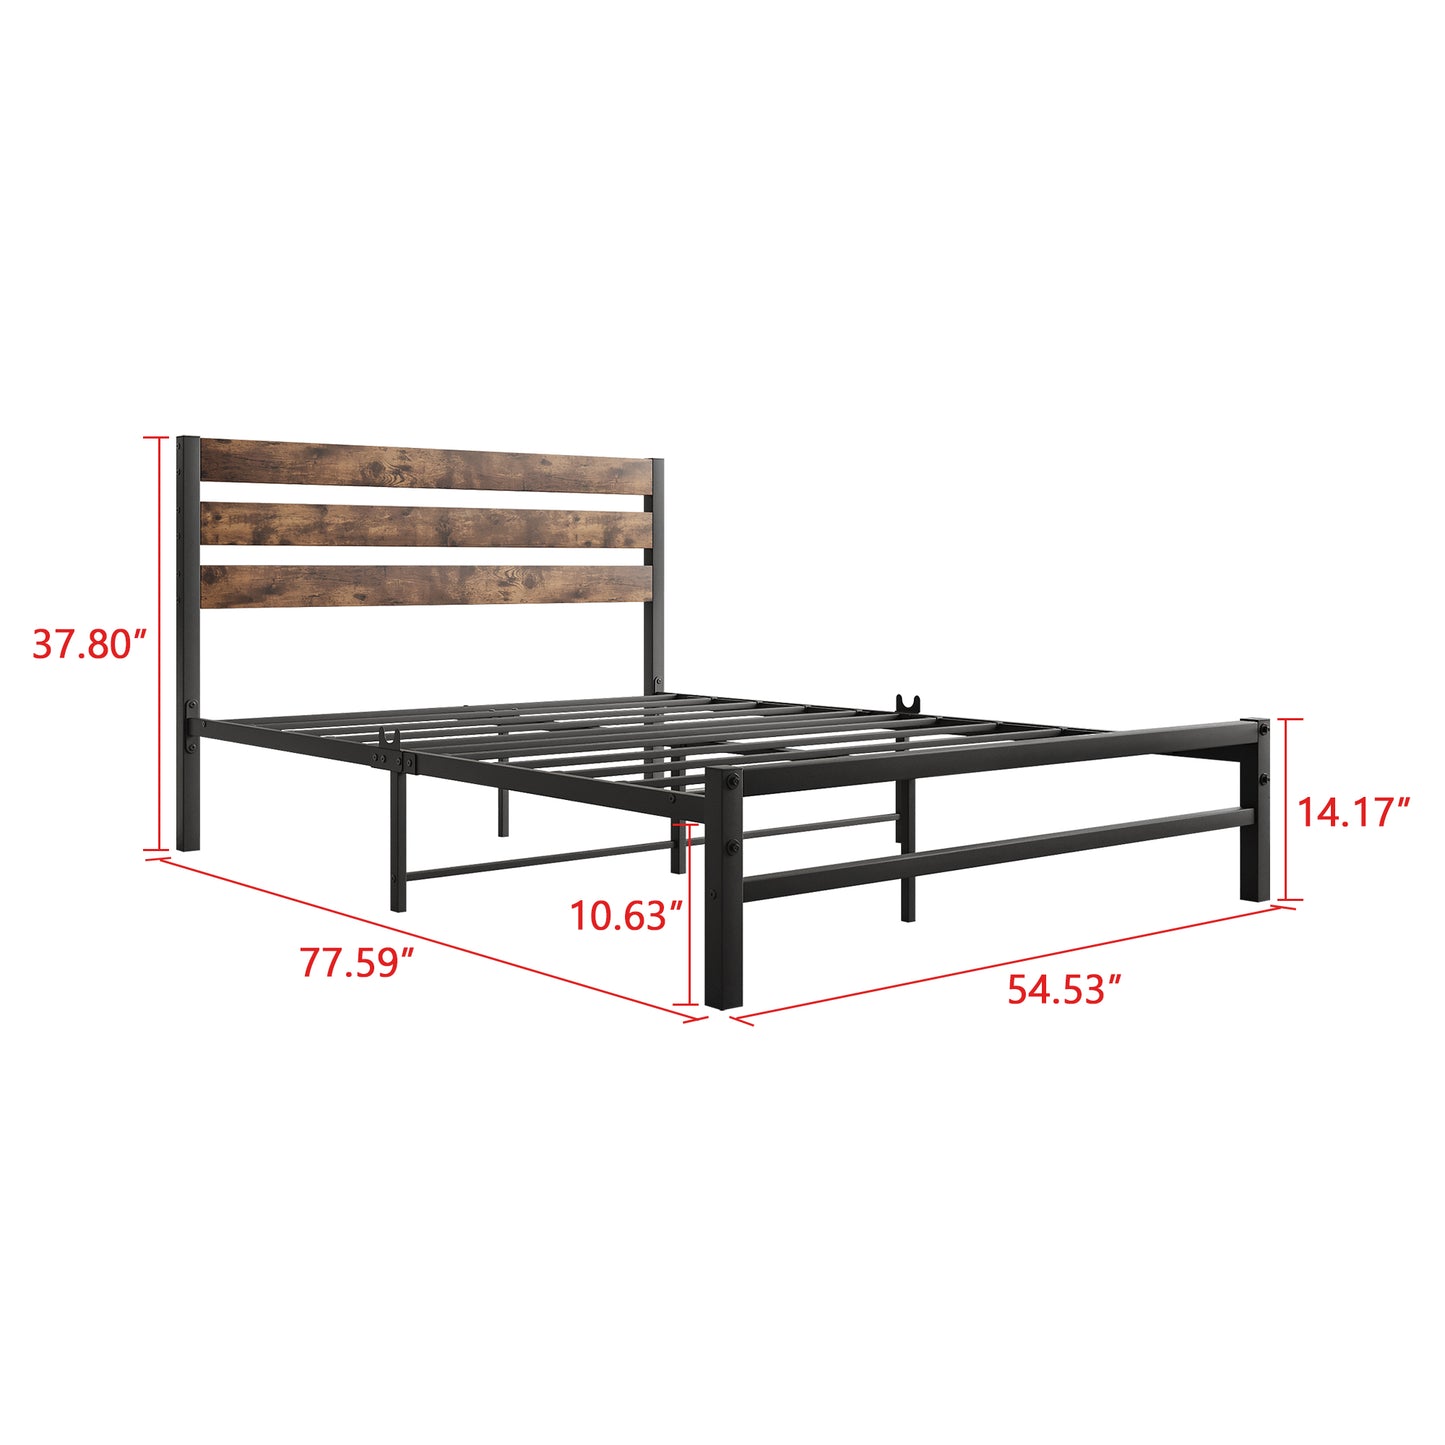 SYNGAR Full Size Bed Frame with Strong Metal Slats, Iron Platform Bed Frame with Rustic Wooden Headboard, Mattress Foundation with 400LBS Load Capacity, Noise Free, No Box Spring Needed, Black